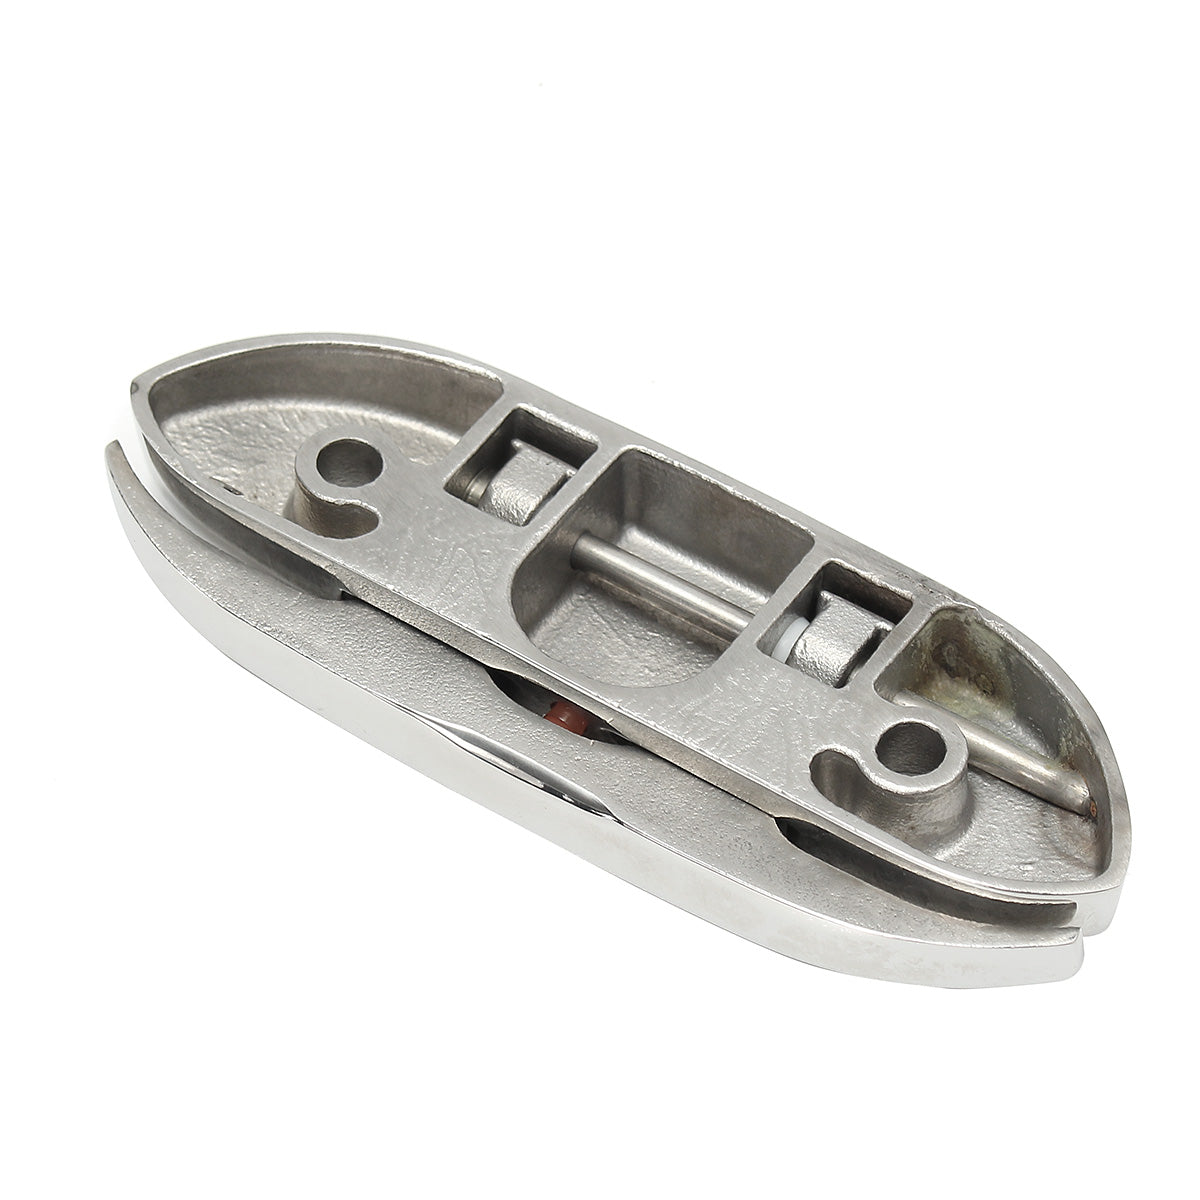 Gray 316 Stainless Steel Marine Flip Up Folding Pull Up Cleat 4-1/2 Inch 118mm for Boat